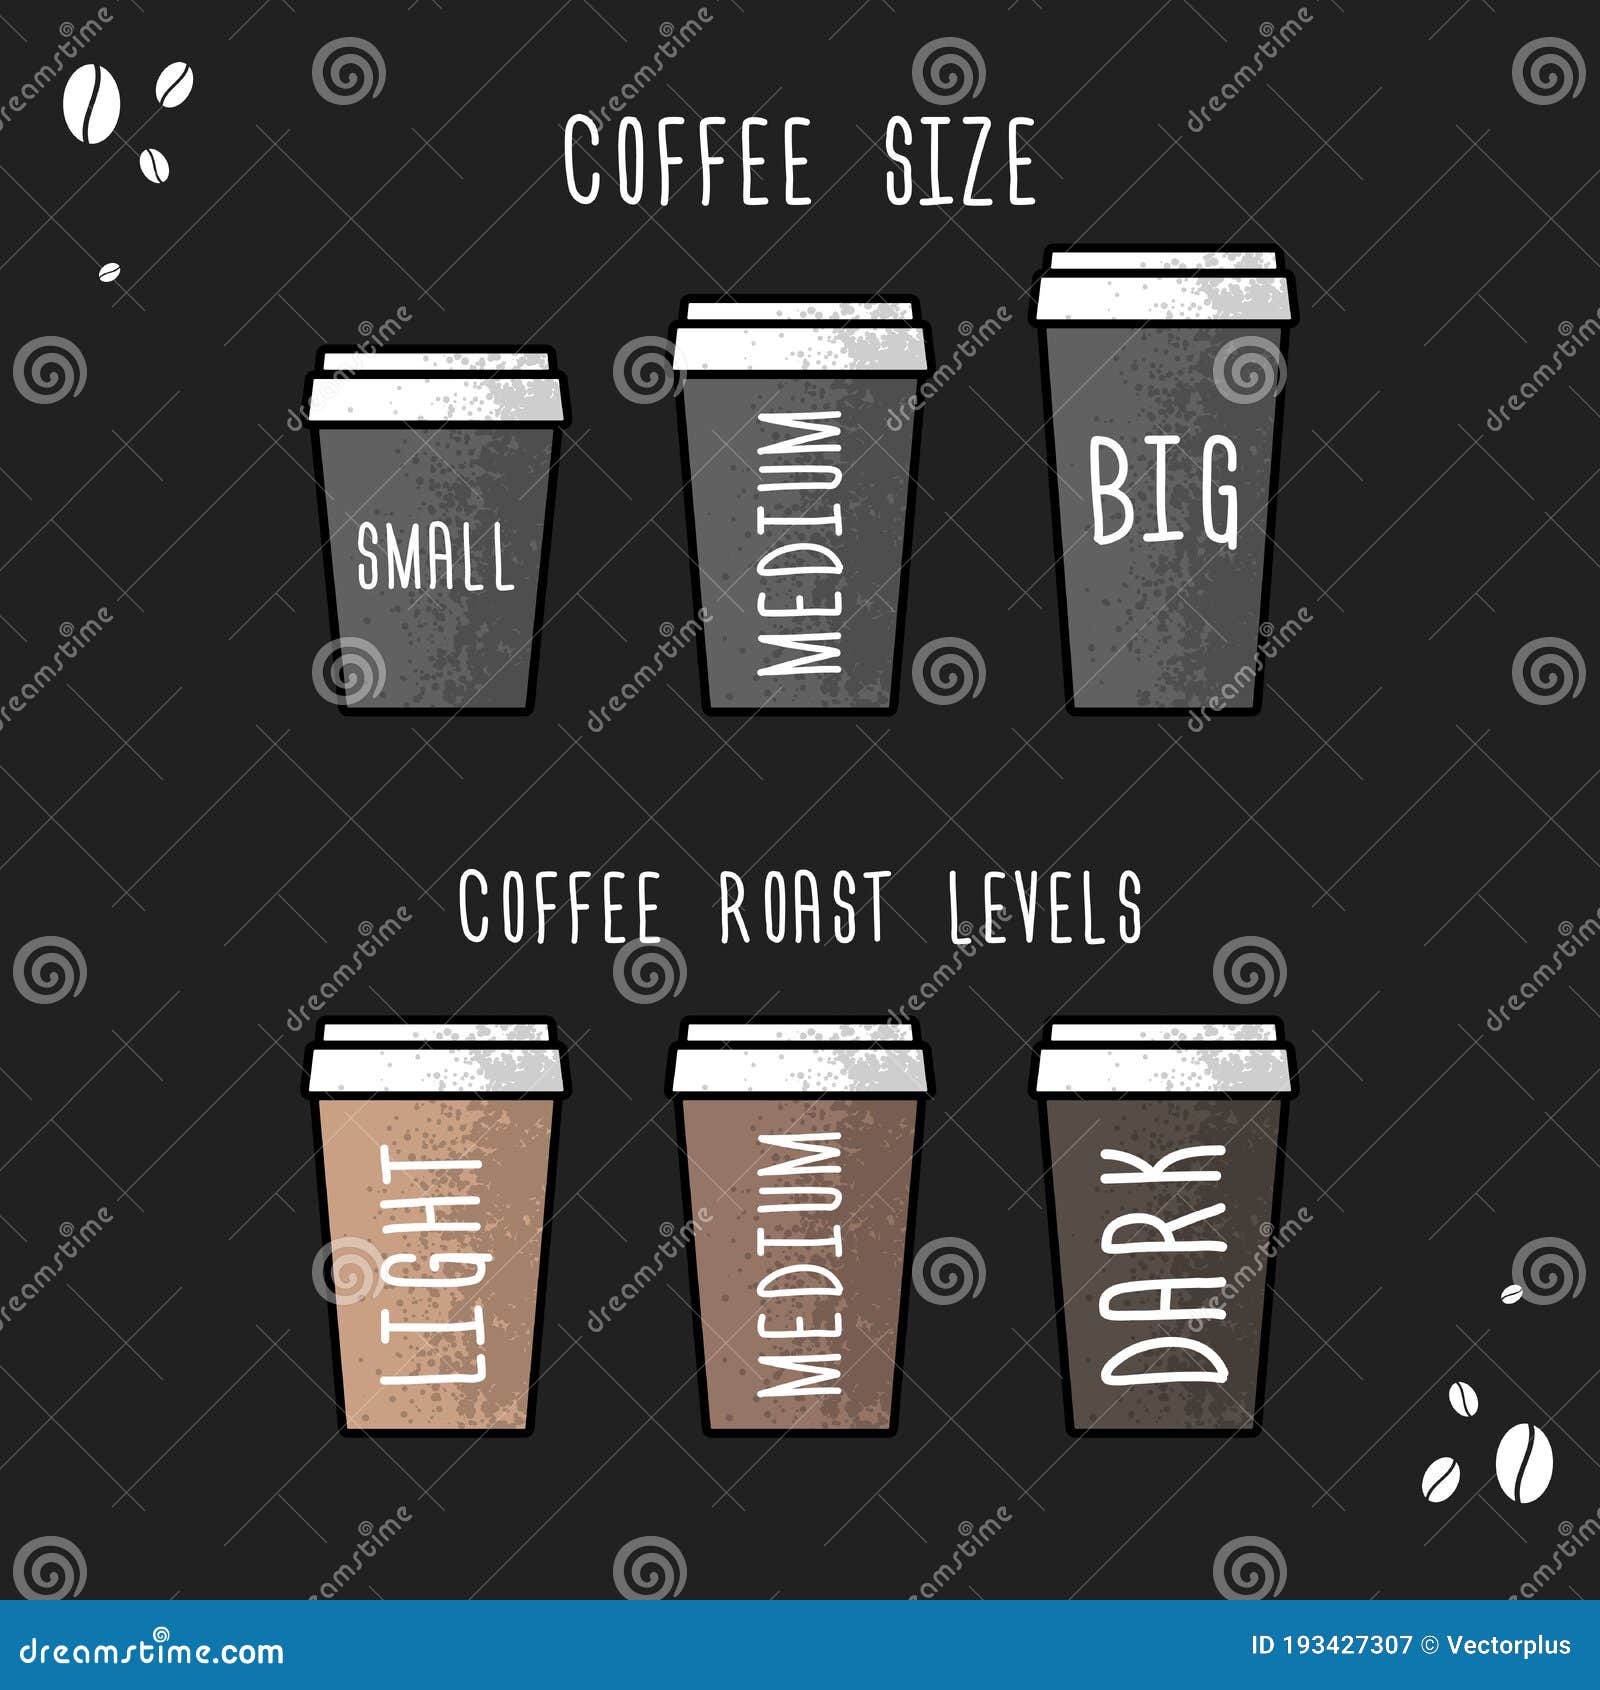 Poster Coffee Cup Size and Coffee Roast Levels. Vector Flat Illustration  Stock Vector - Illustration of restaurant, menu: 193427307